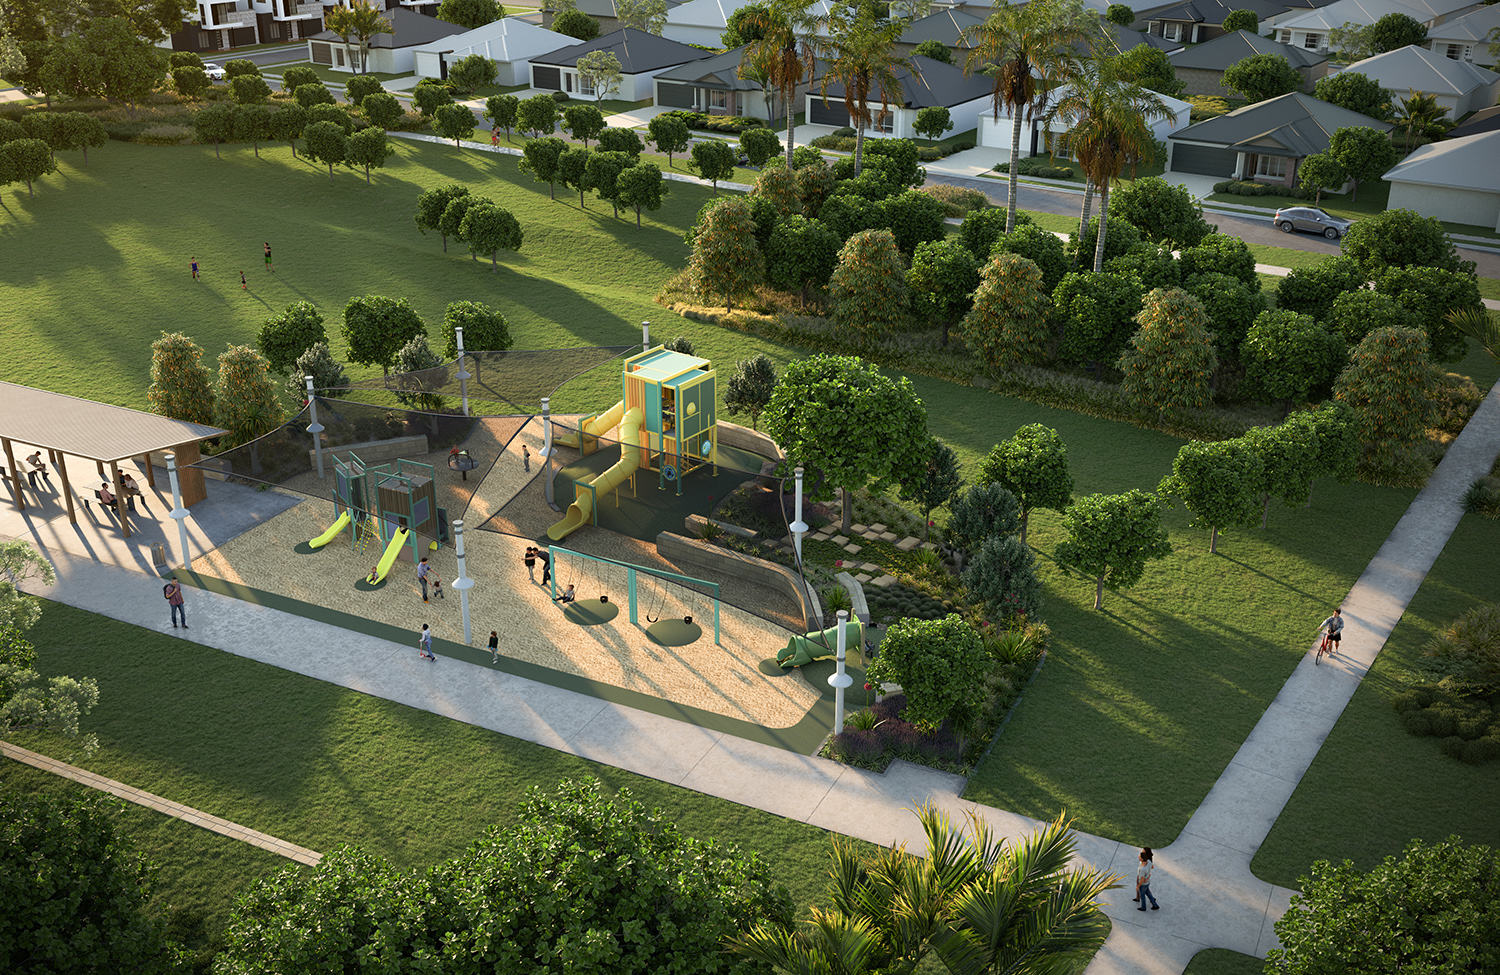 Work starts on second ‘linear park’